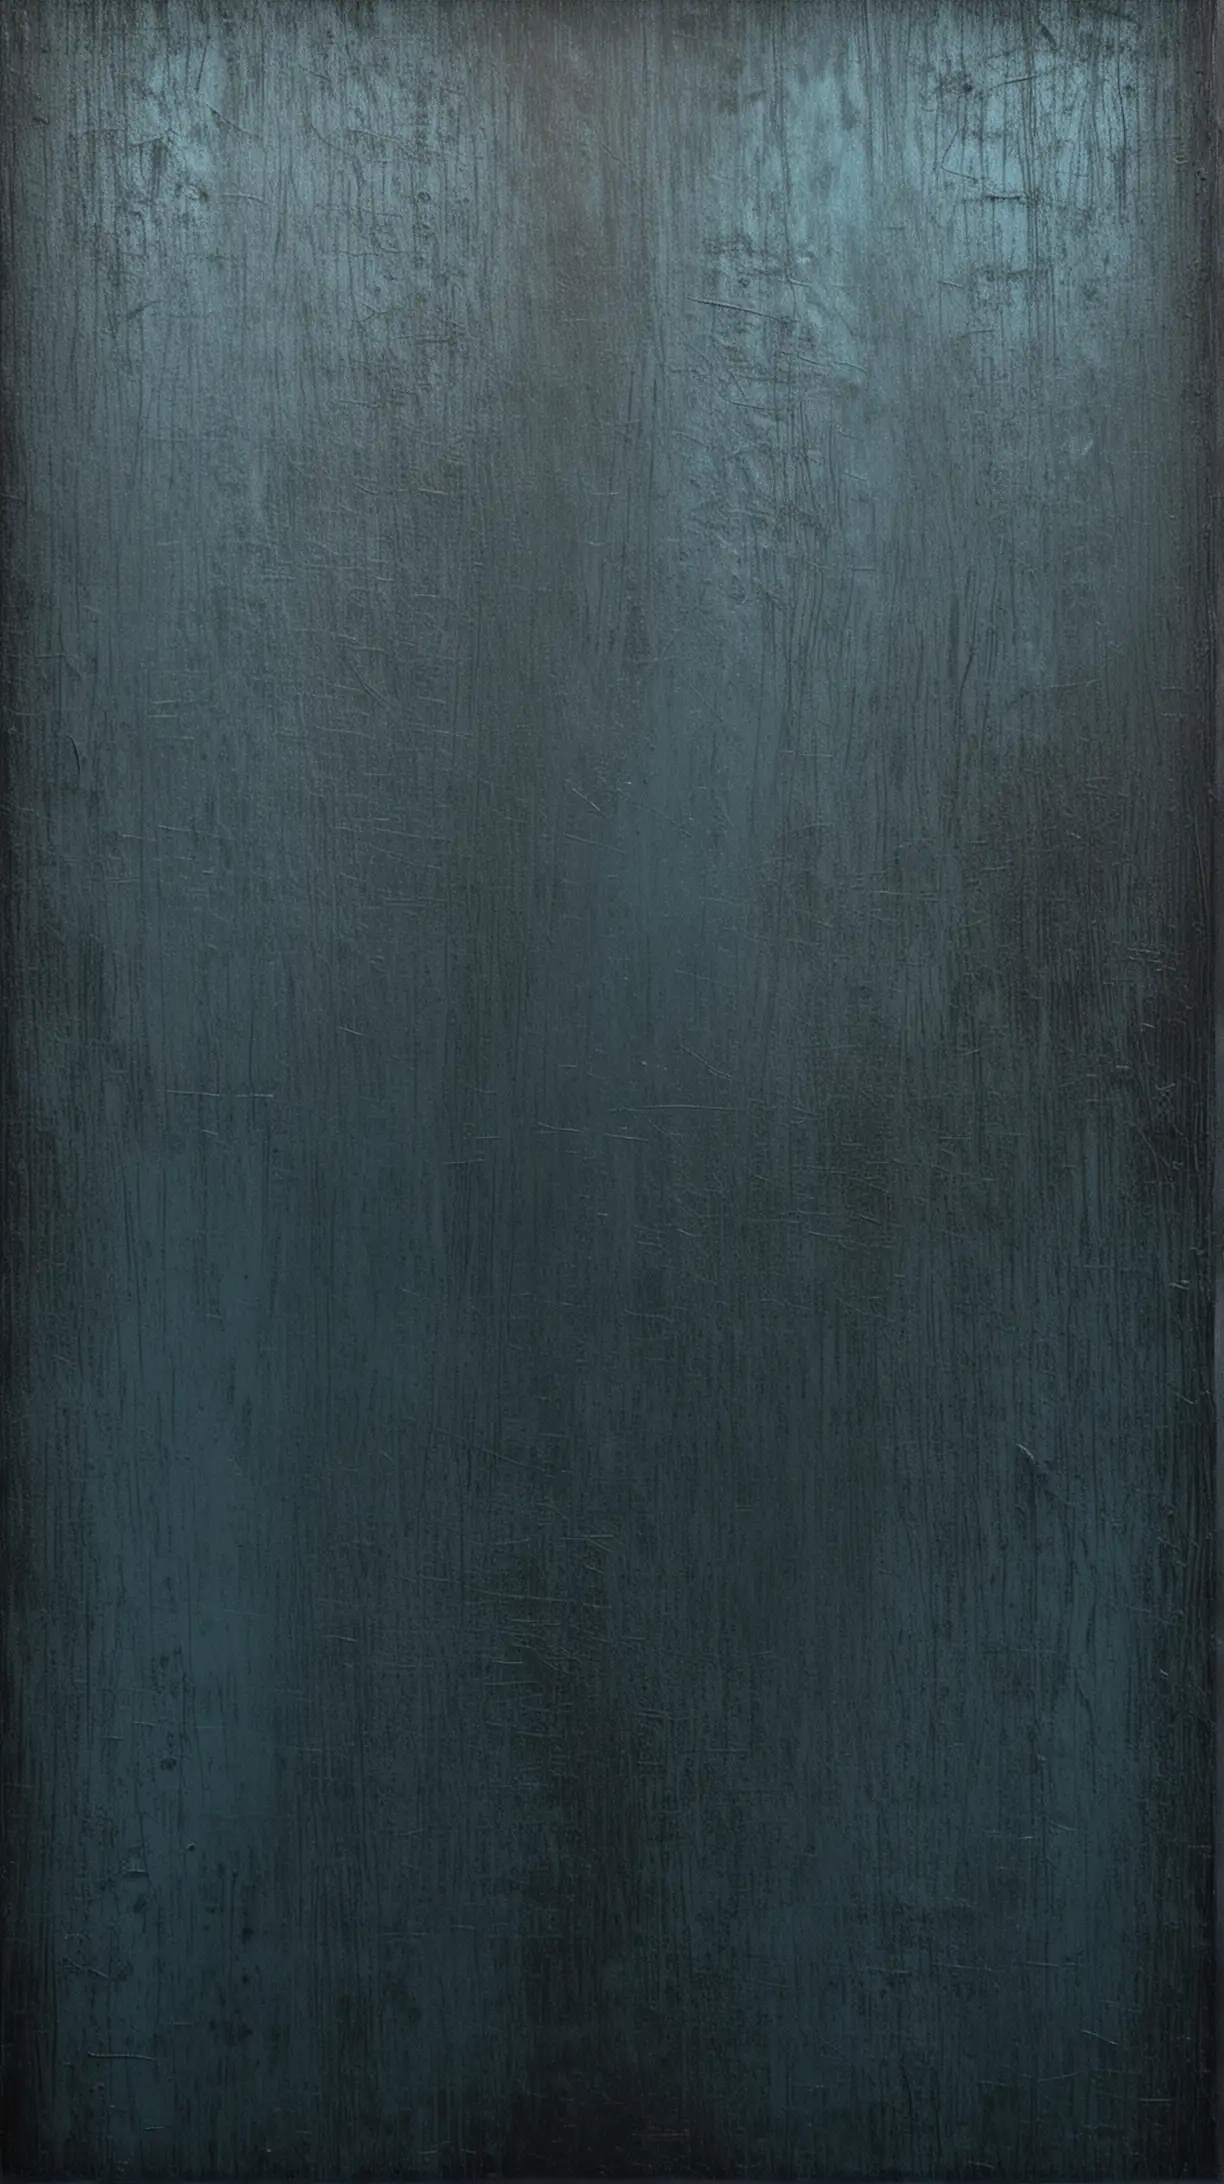 Ethereal Burnt Bluish Metal Monochrome Background with Fine Art Textures